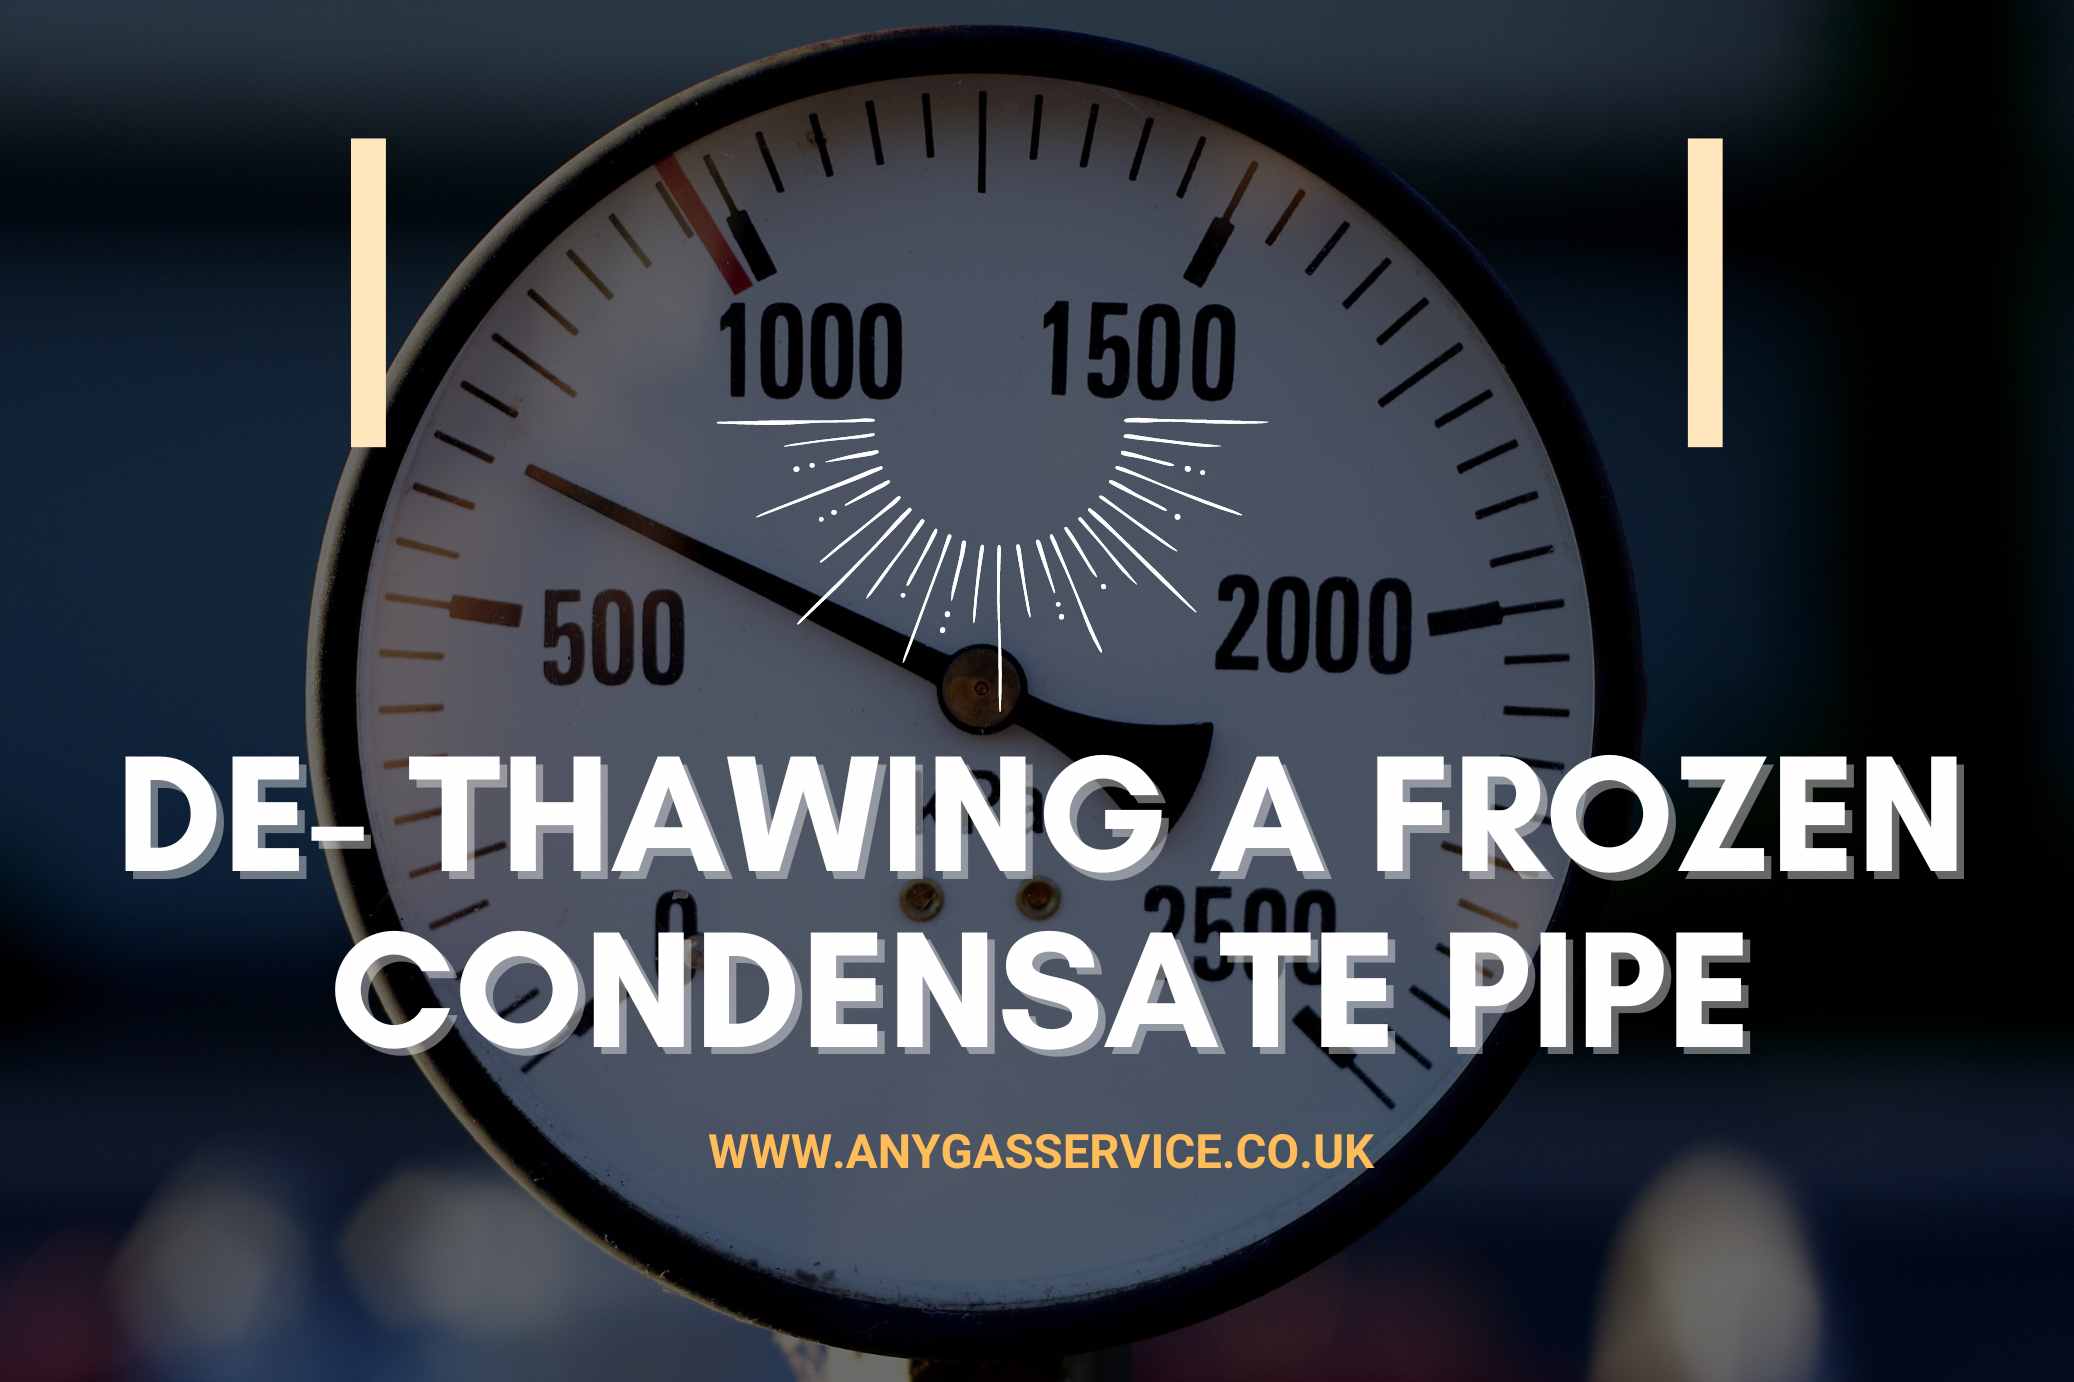 De- Thawing a Frozen condensate Pipe